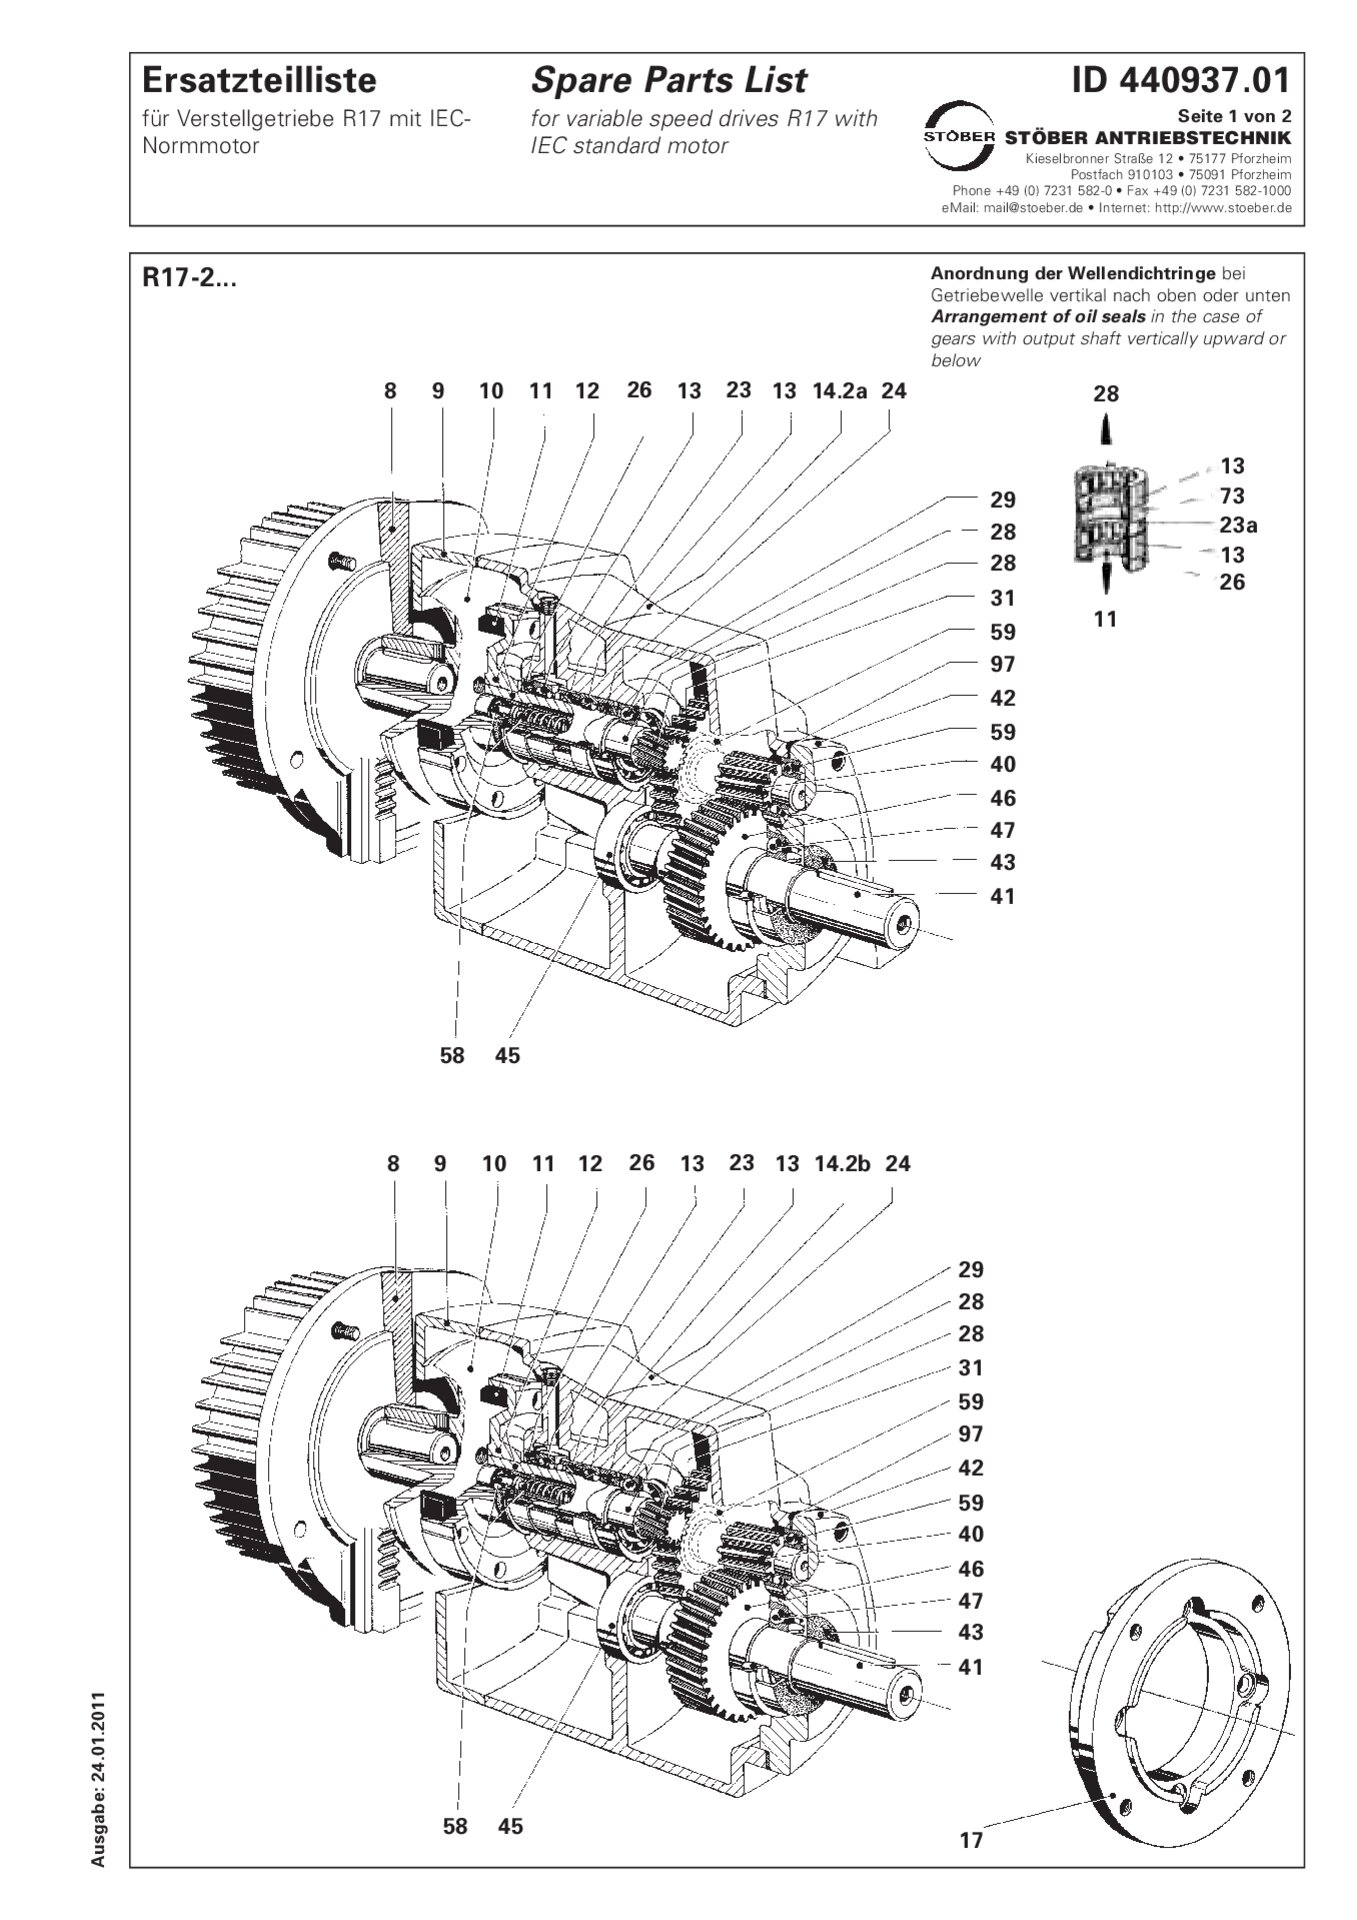 Spare parts list R17-2 with IEC standard motor